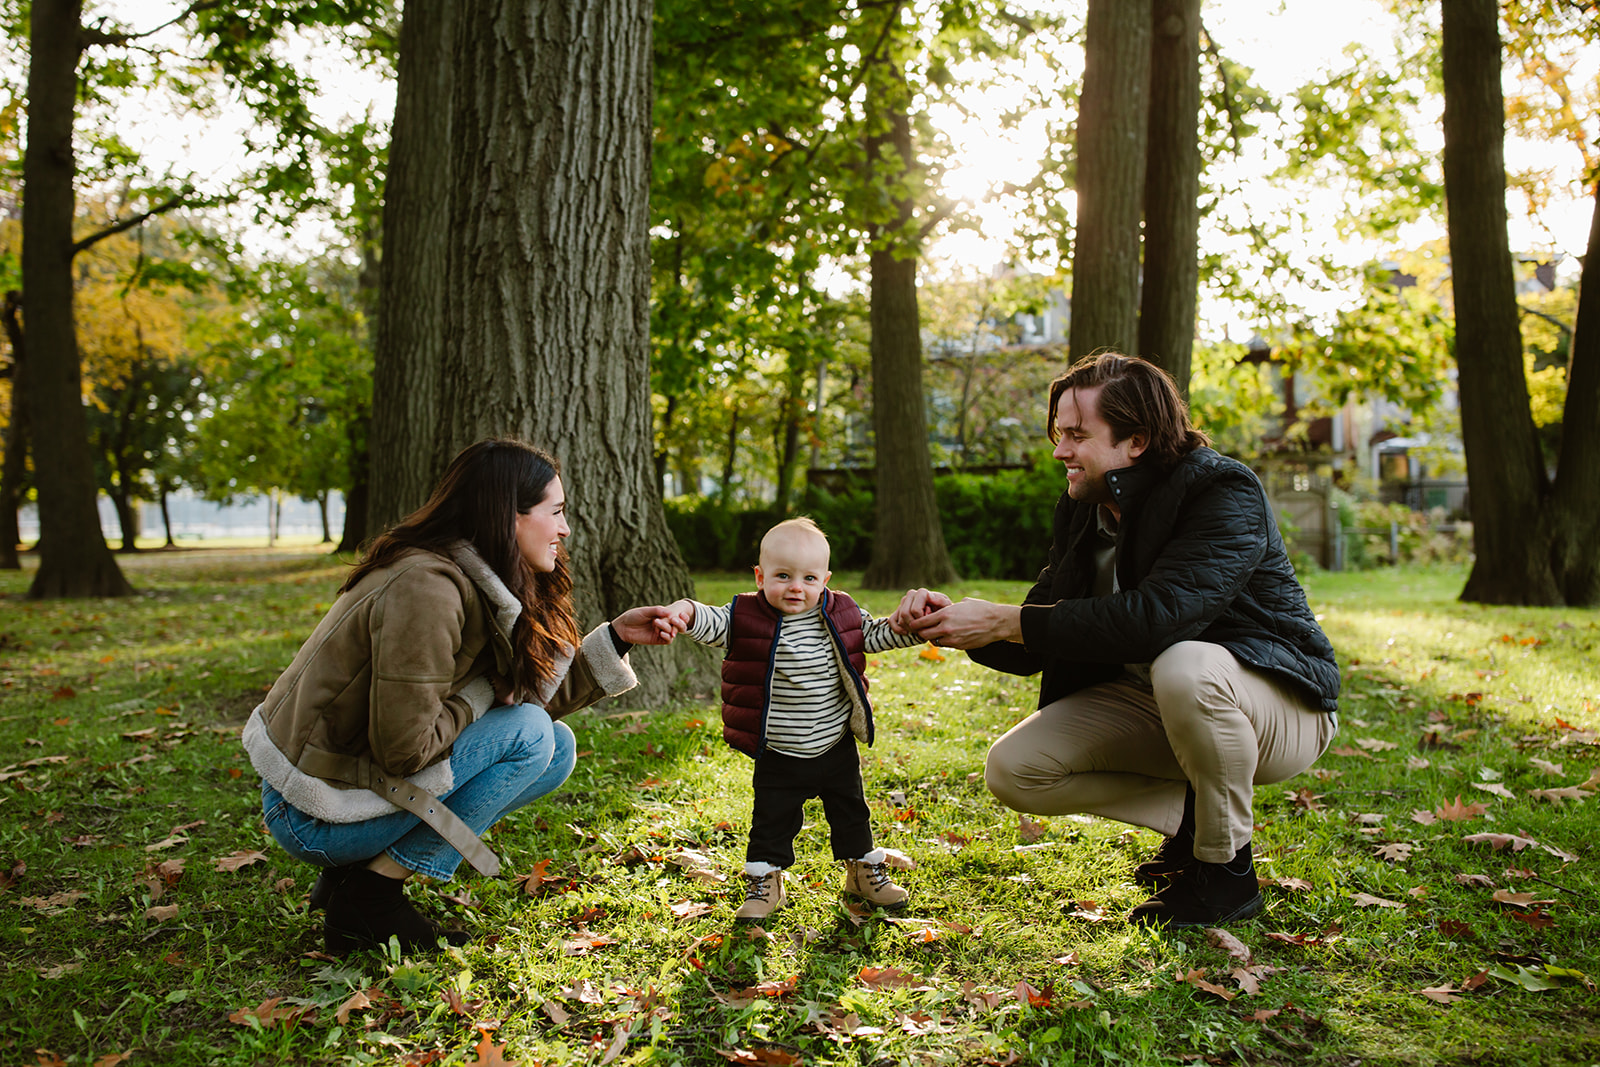 Mother and Father helping their baby son walk during a photo shoot in a park